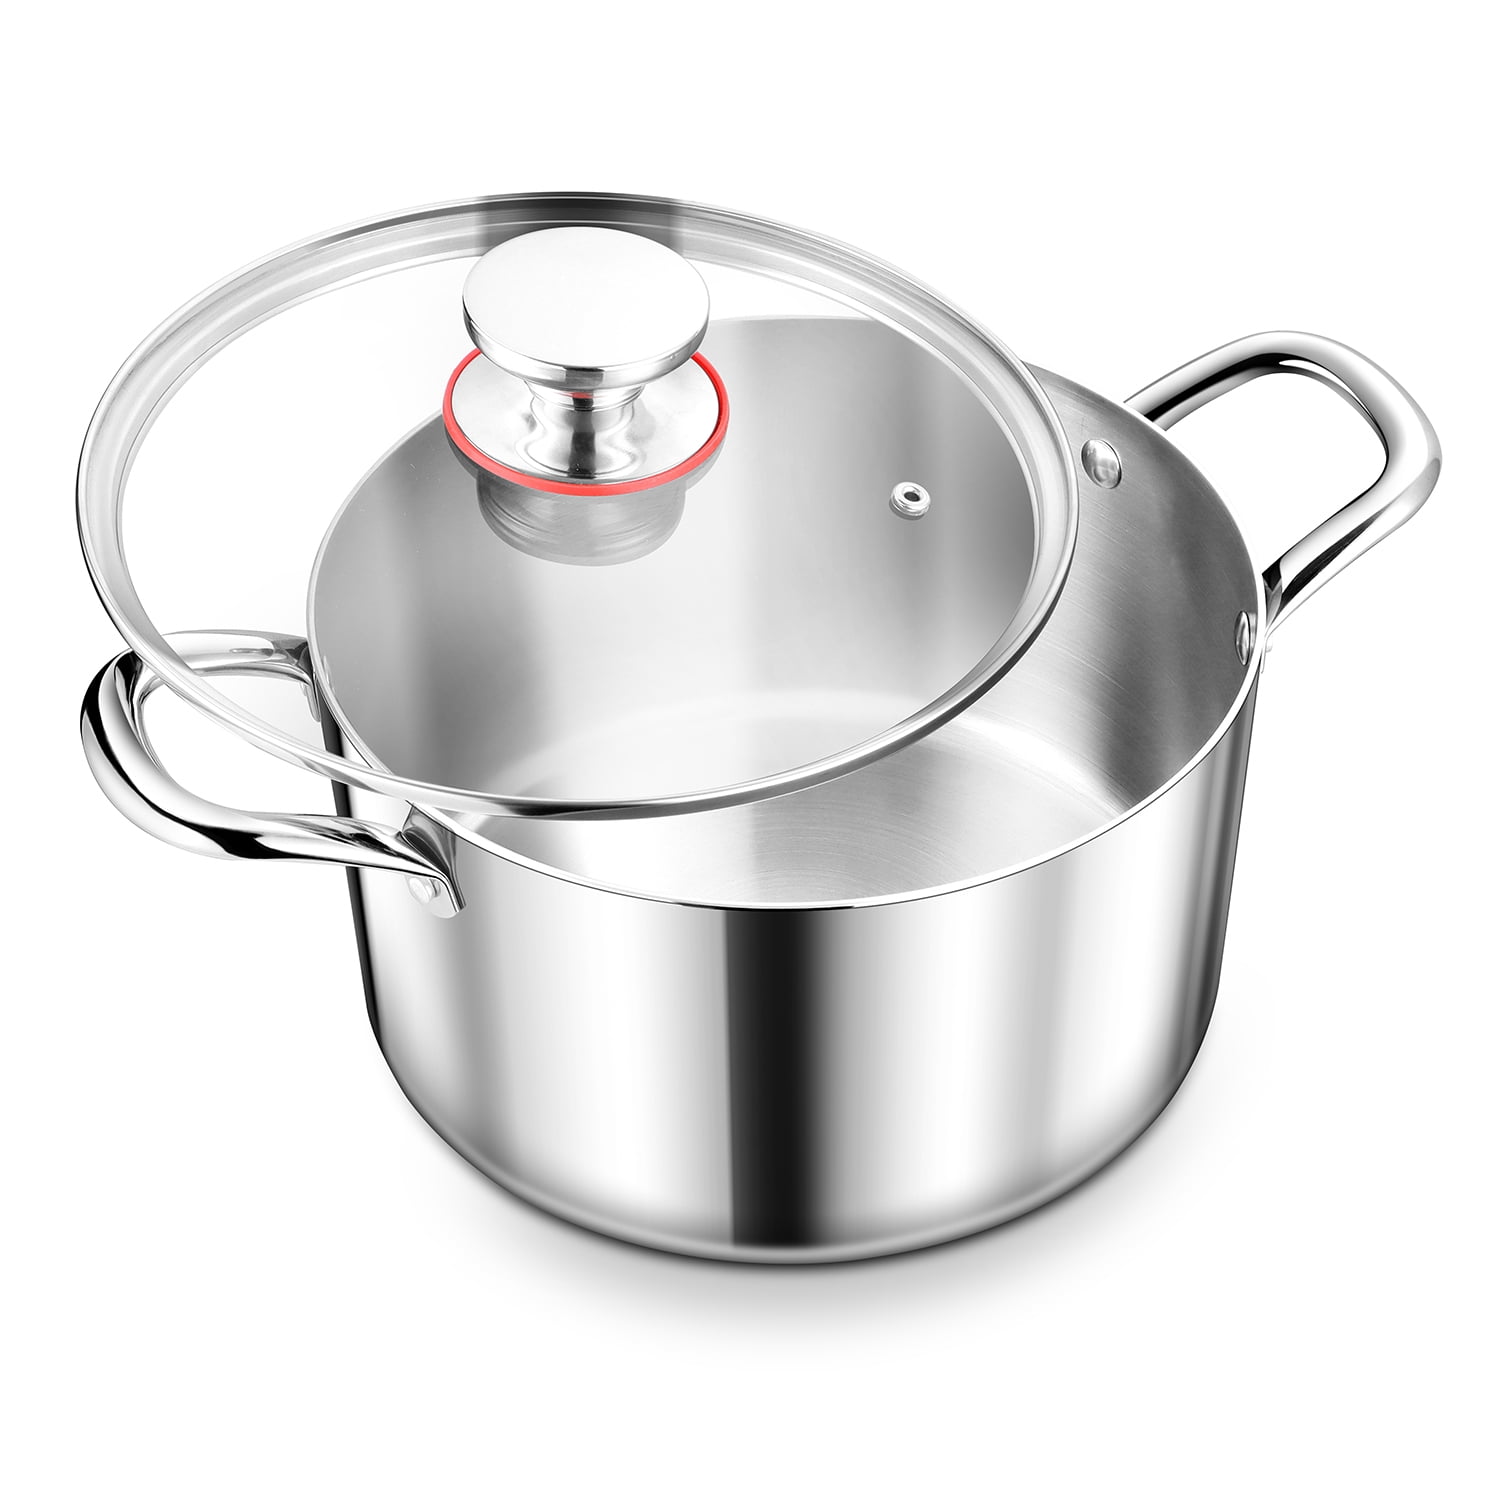 4-quart Stock Pot with Lid in 5-ply Stainless Steel » NUCU® Cookware &  Bakeware